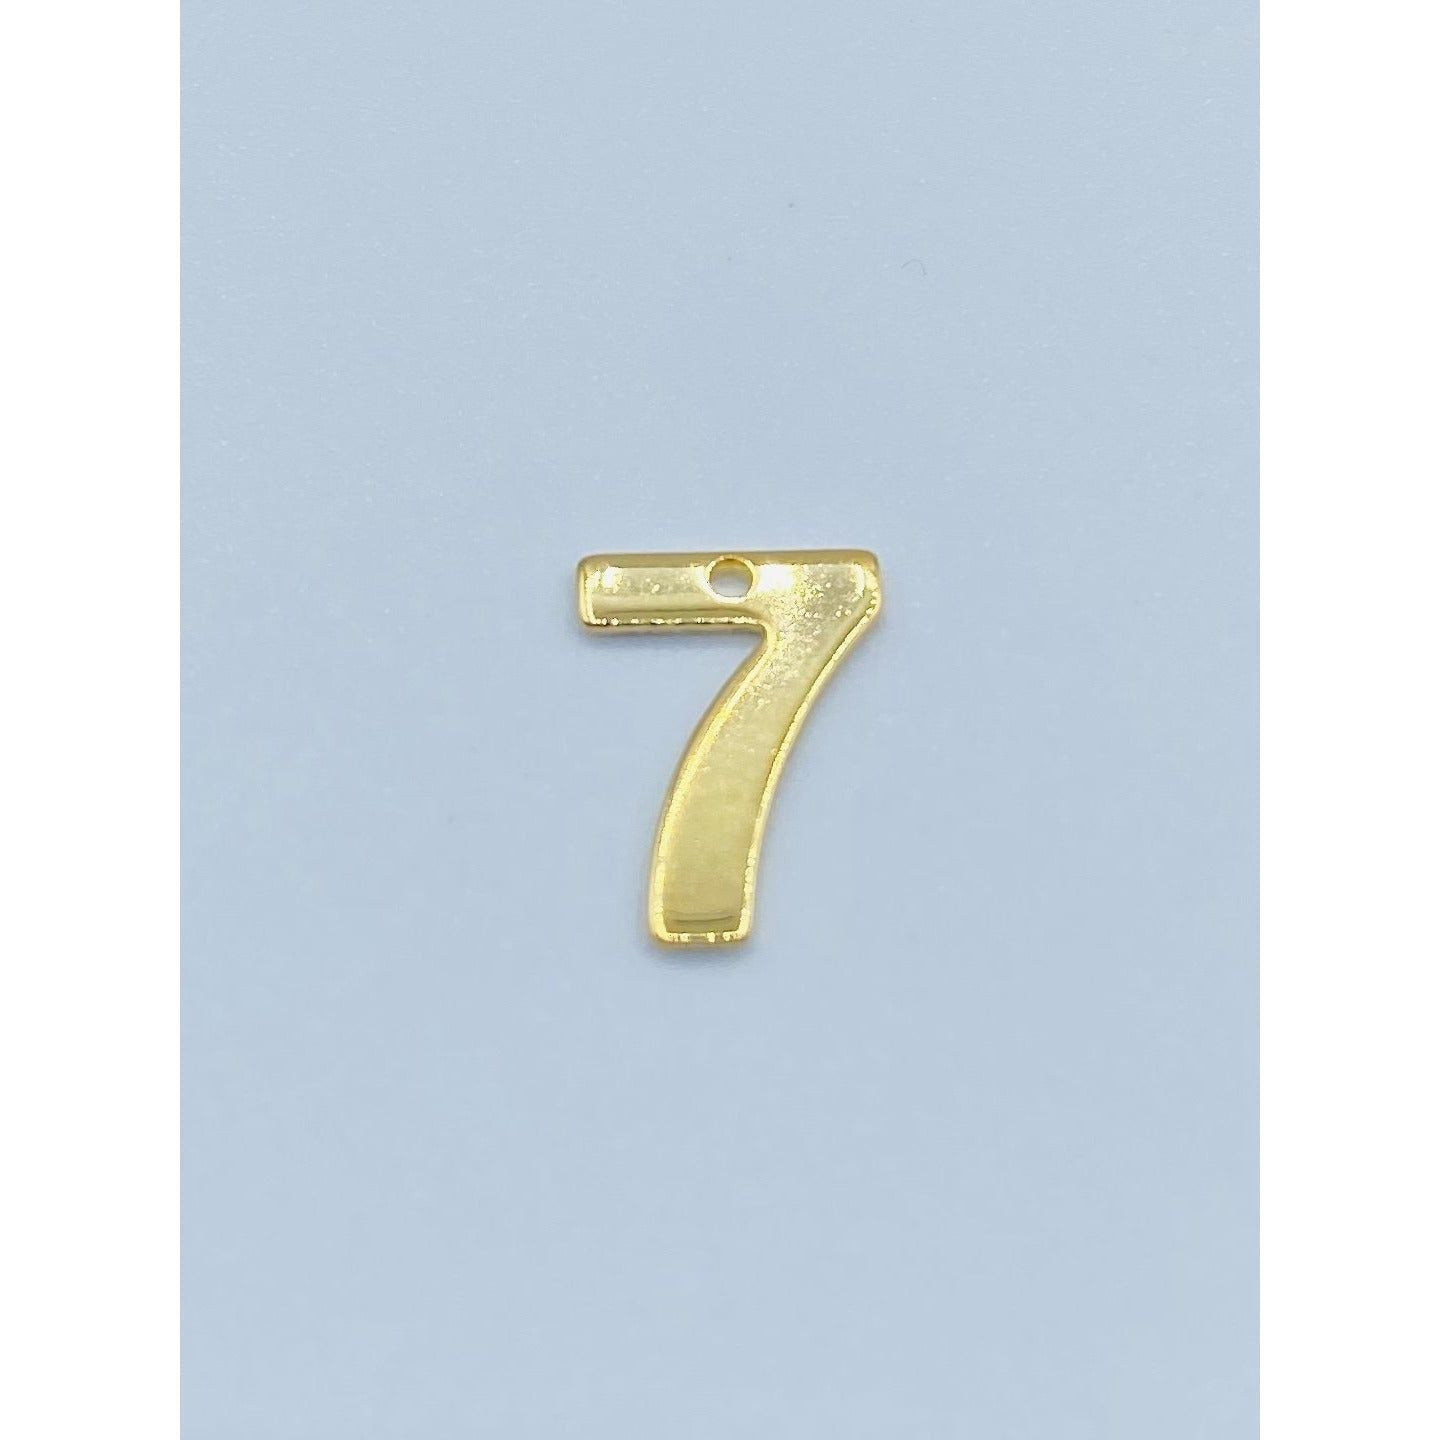 EXPRESS YOURSELF NUMBER EARRING CHARM